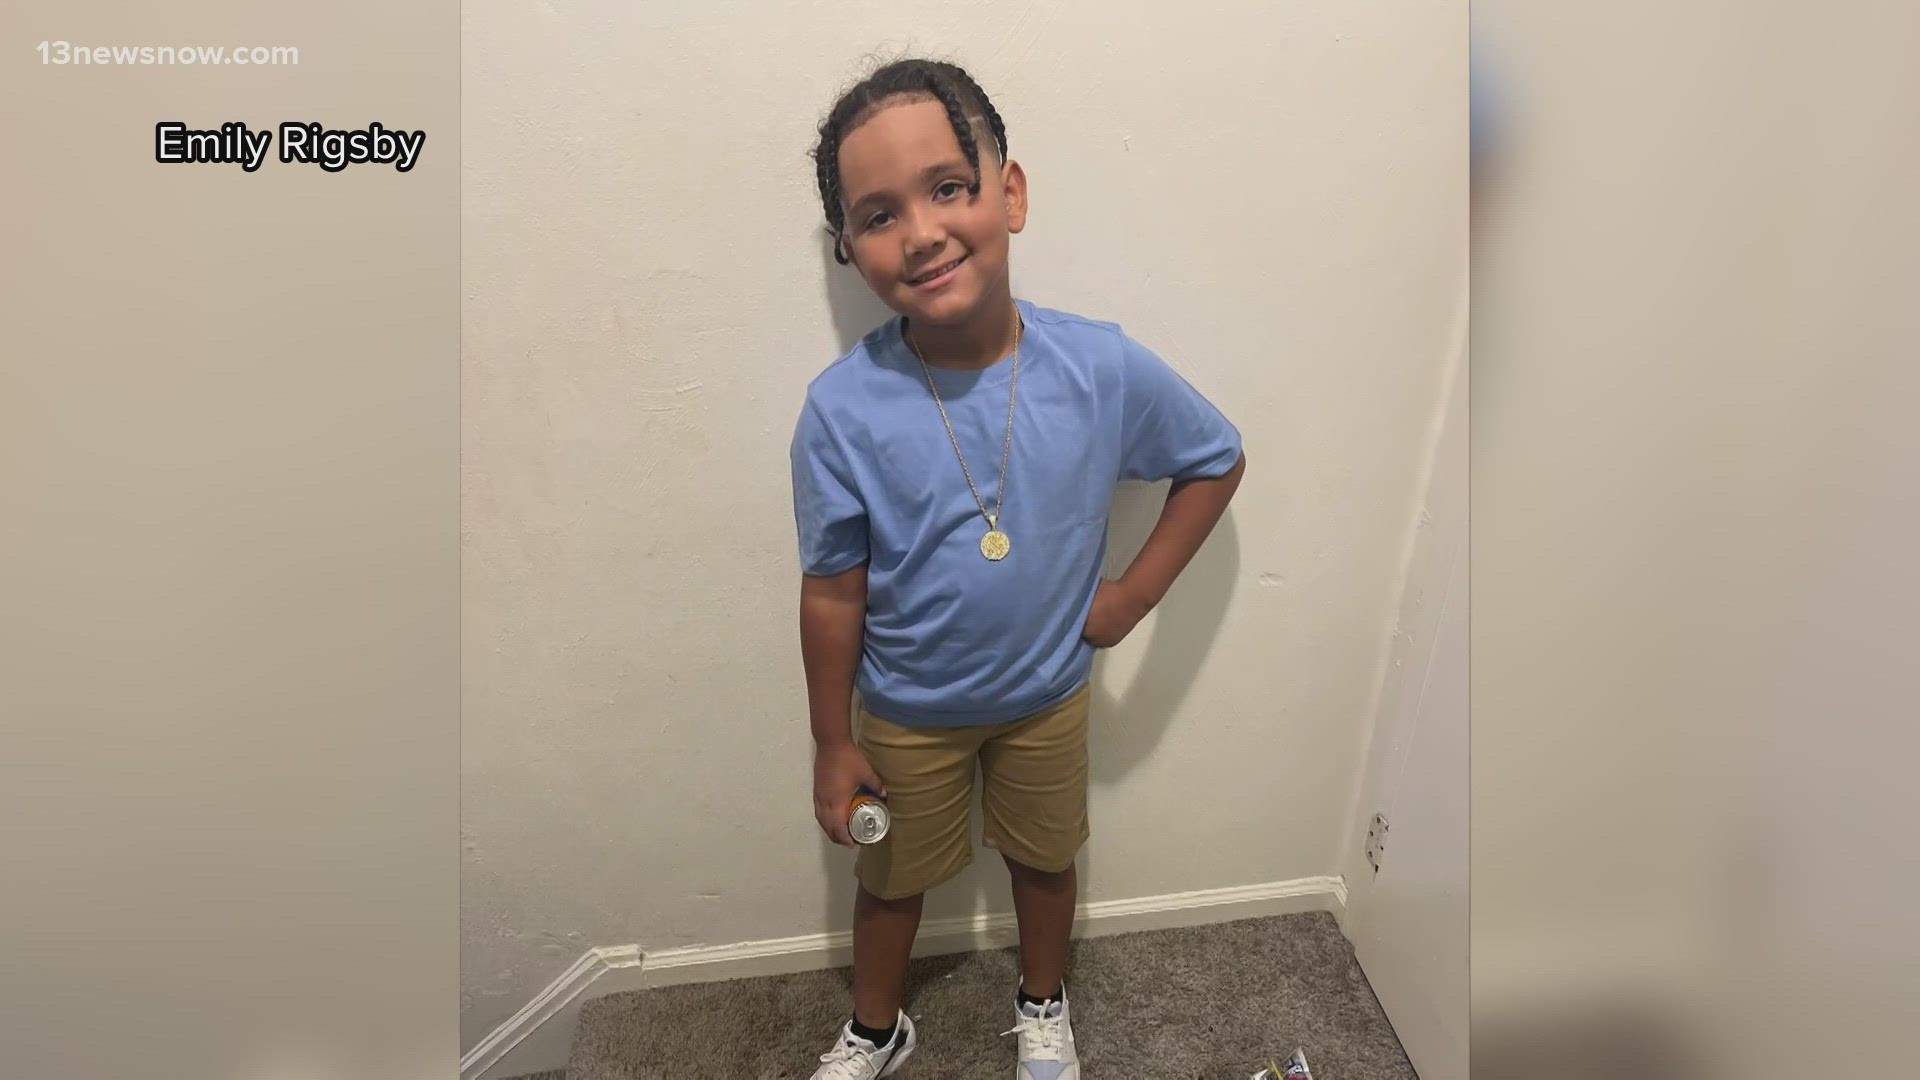 A Virginia Beach family is holding on to hope after a stray bullet hit their 8-year-old son while inside their home Tuesday evening.